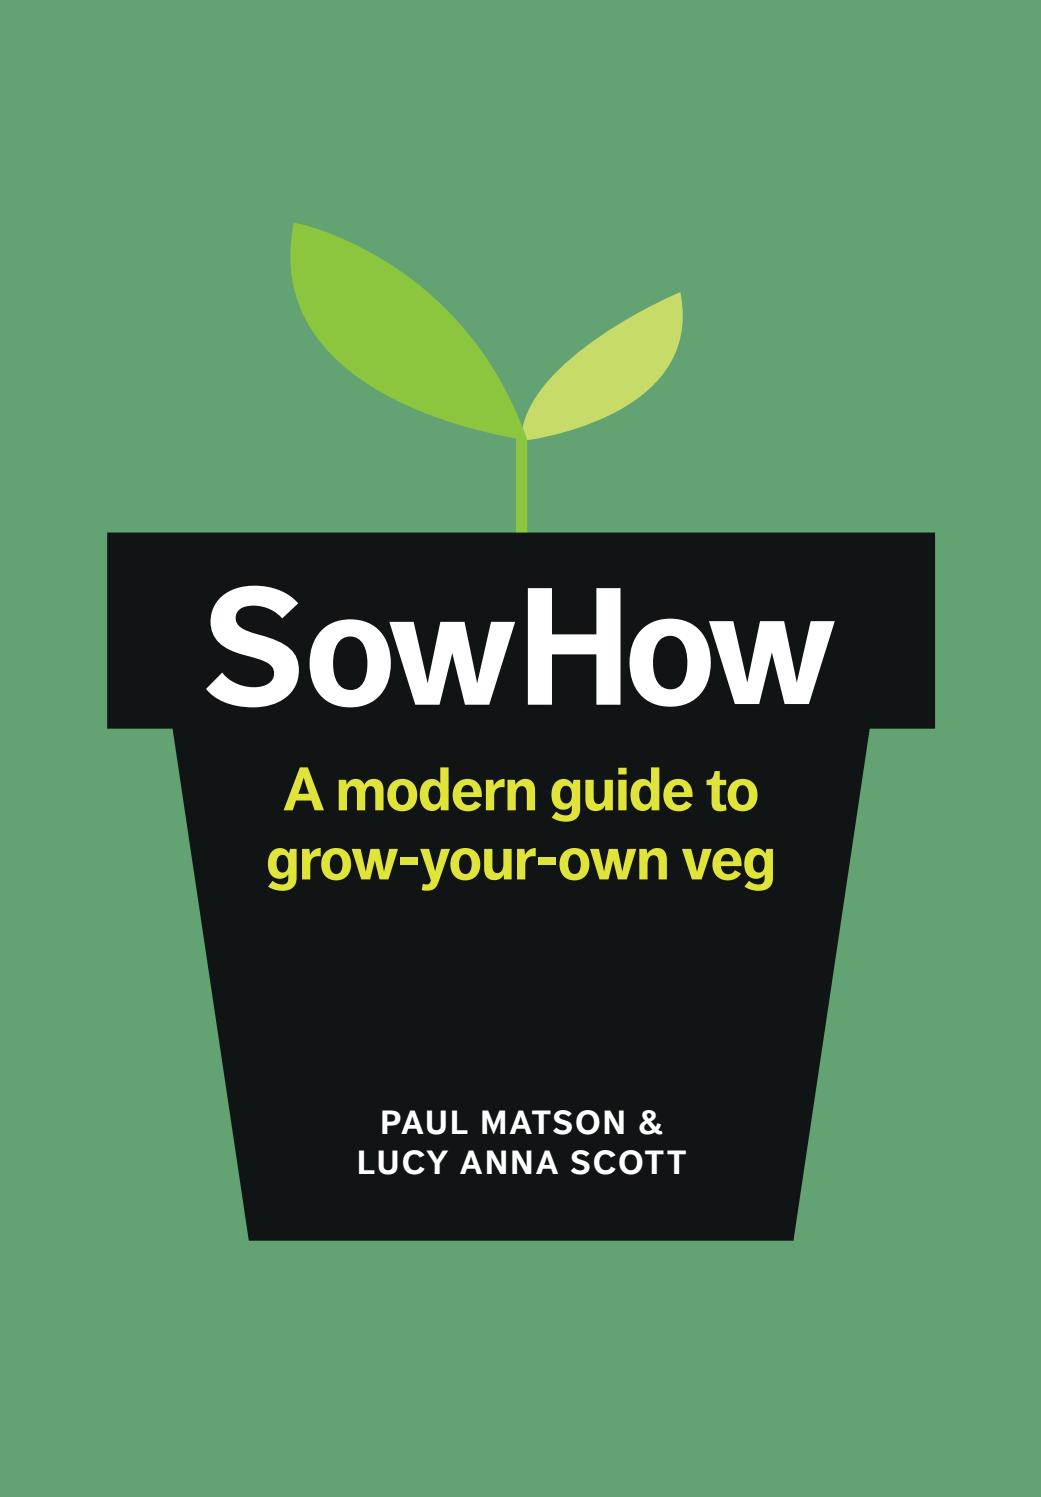 SowHow: A Modern Guide to Grow-Your-Own Veg | Paul Matson